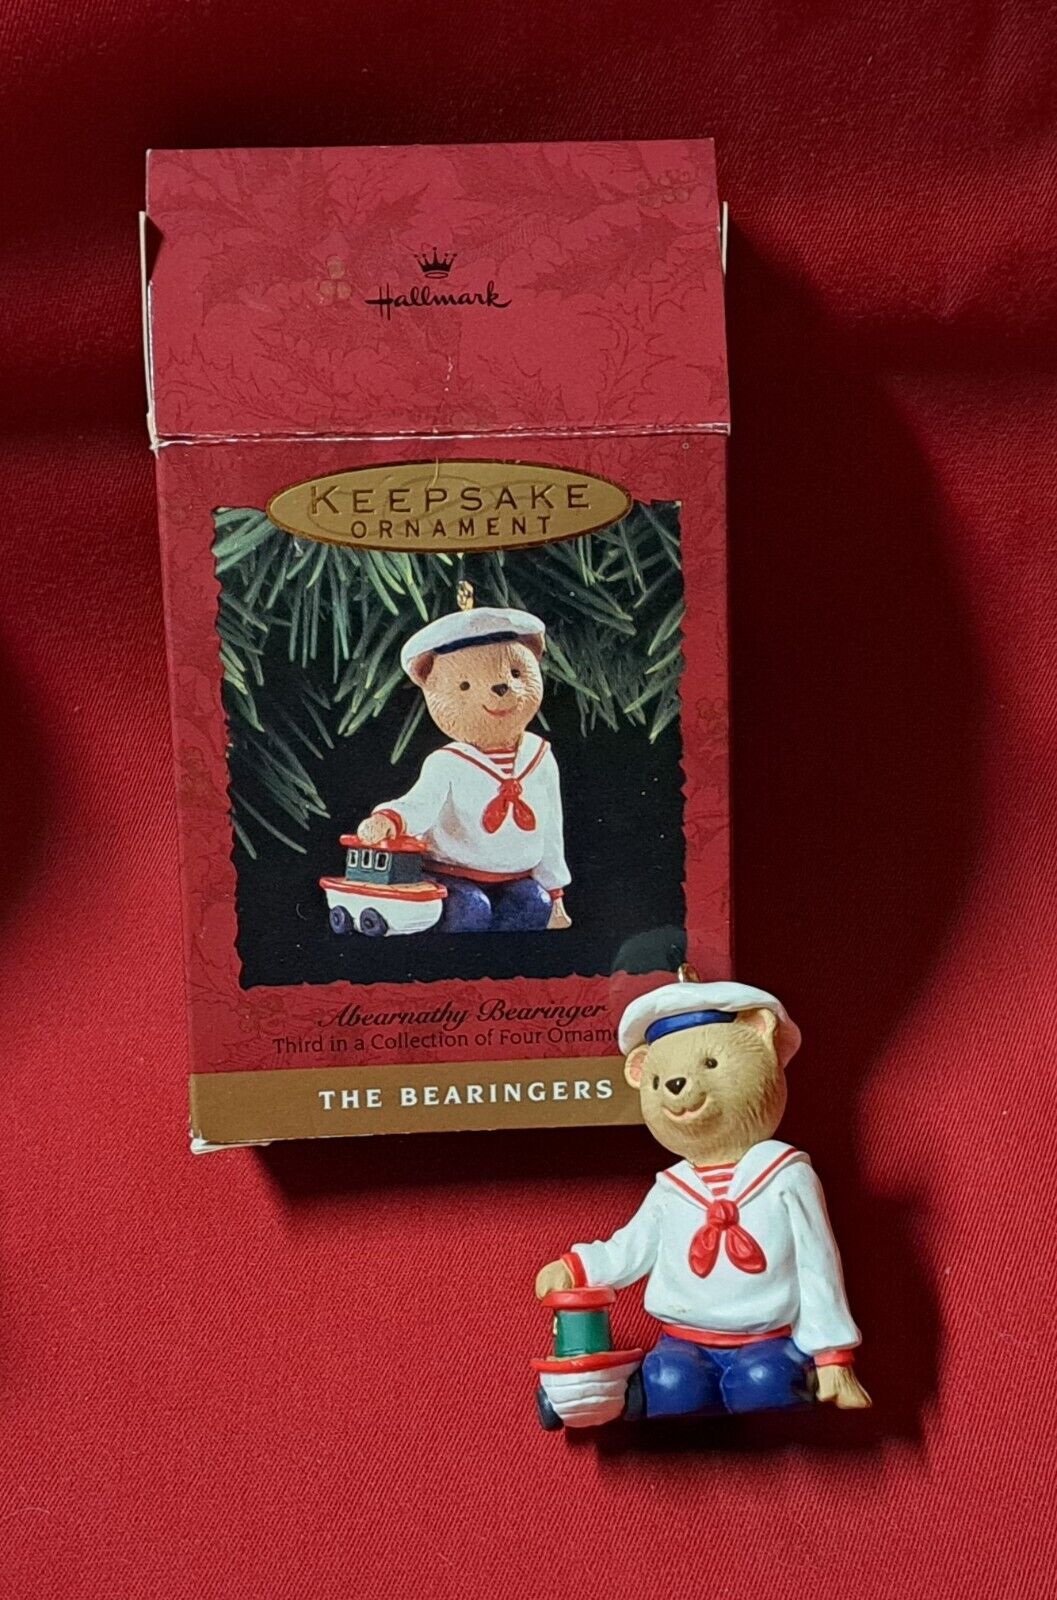 Hallmark & Other Christmas Ornaments  - Add 0nly $1.00 Shipping Each Additional